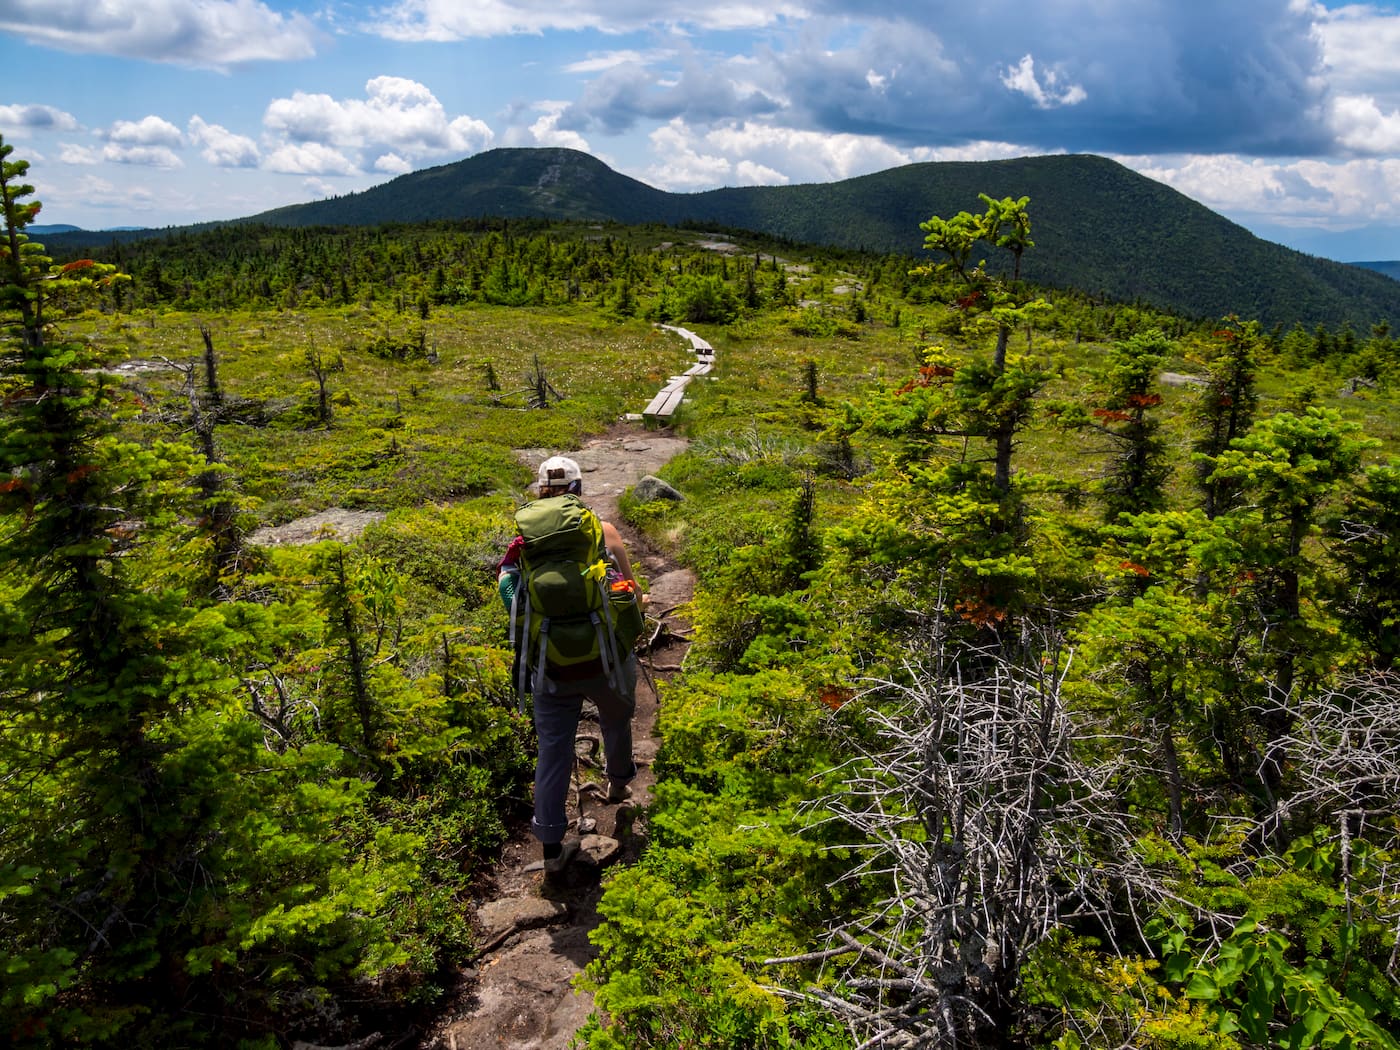 Thru Hiker with backpack and poles hiking through scrub and brush in the mountains of Maine.